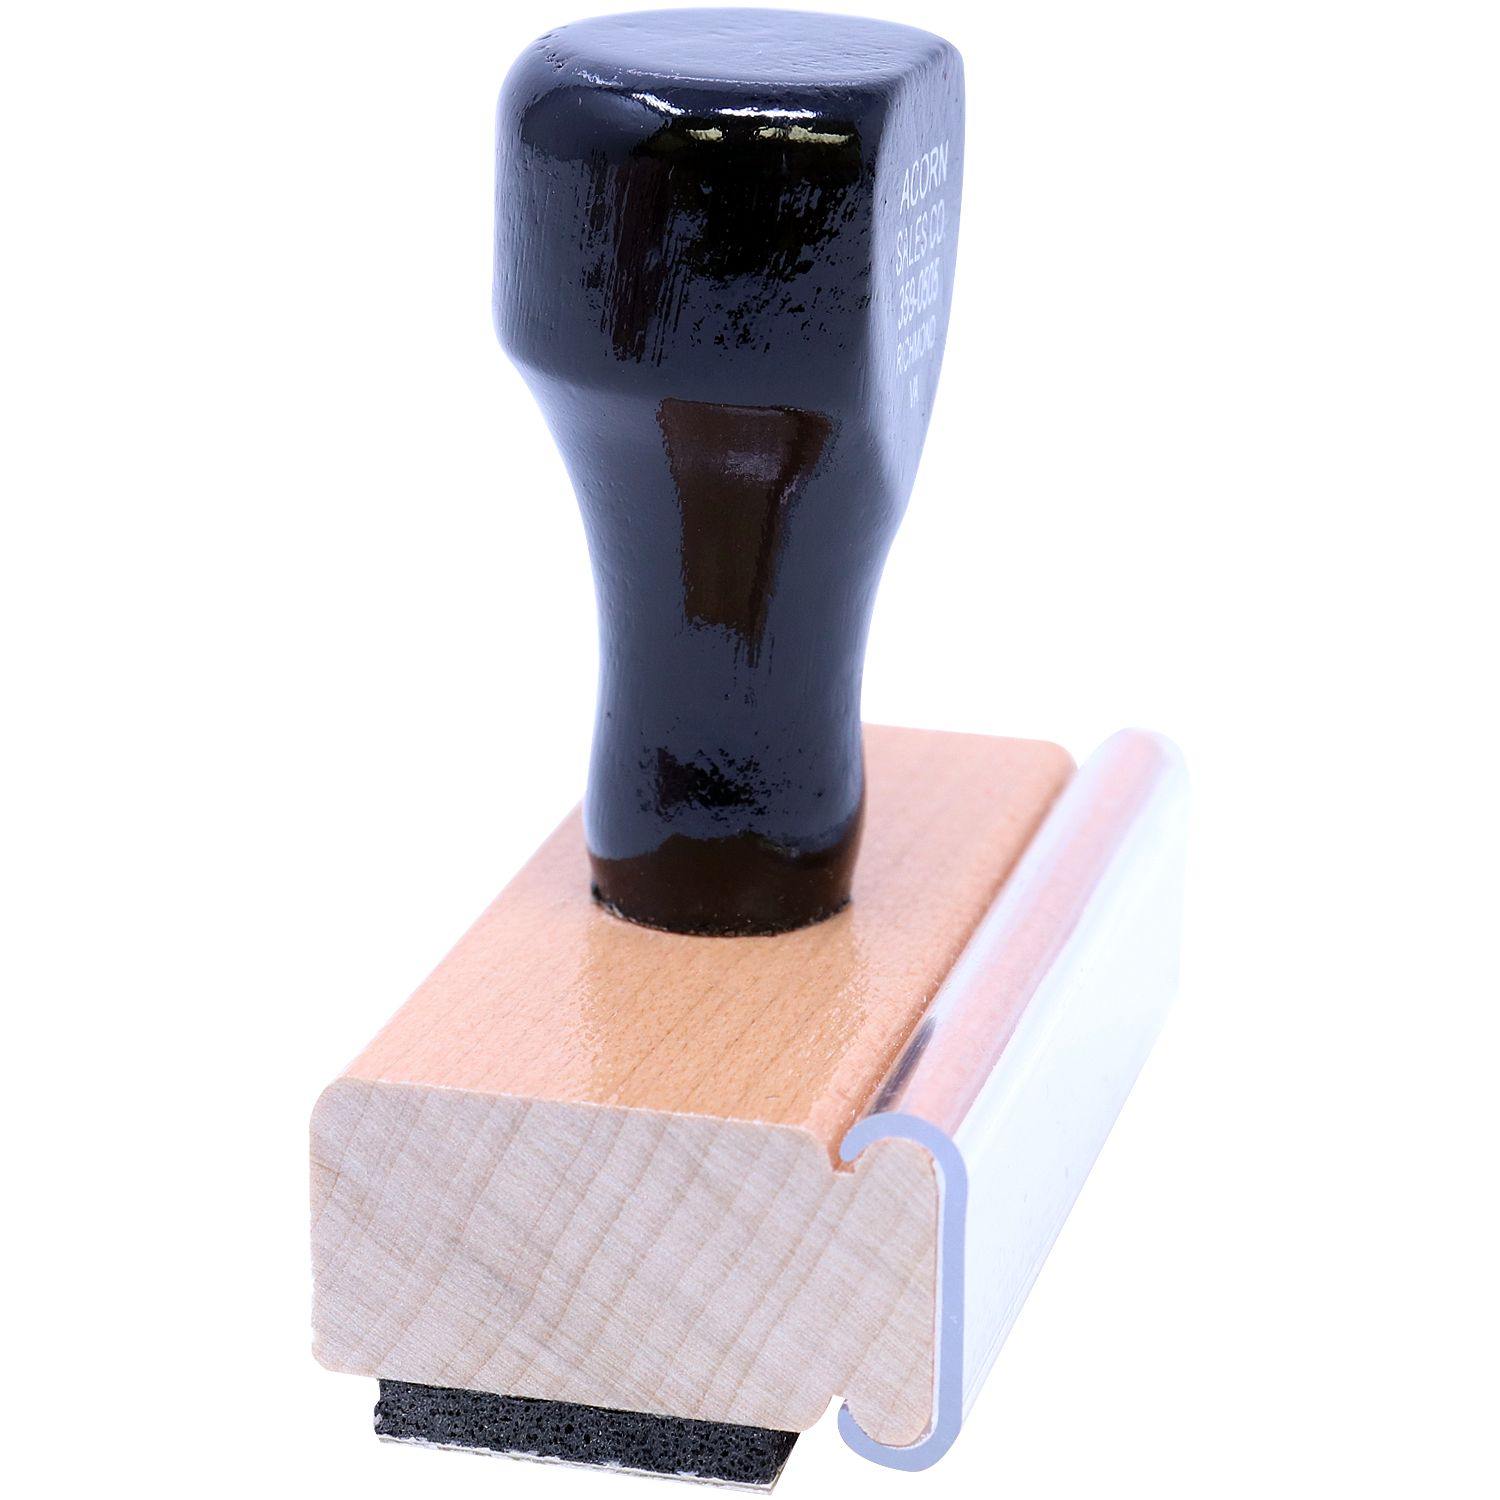 Side View of Change Of Address Rubber Stamp at an Angle